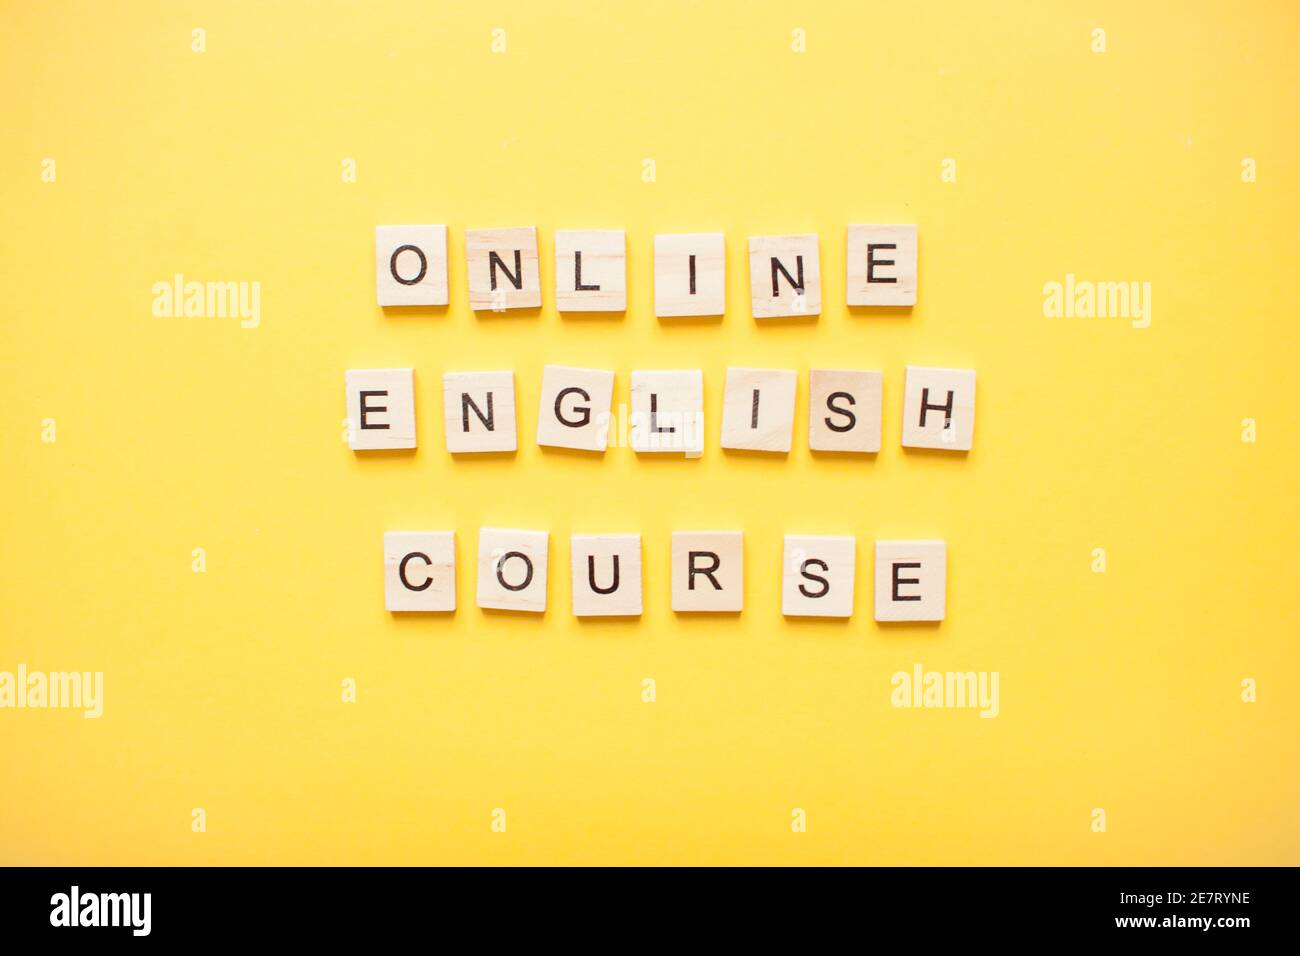 Phrase online english course made from wooden blocks on a light yellow background Stock Photo